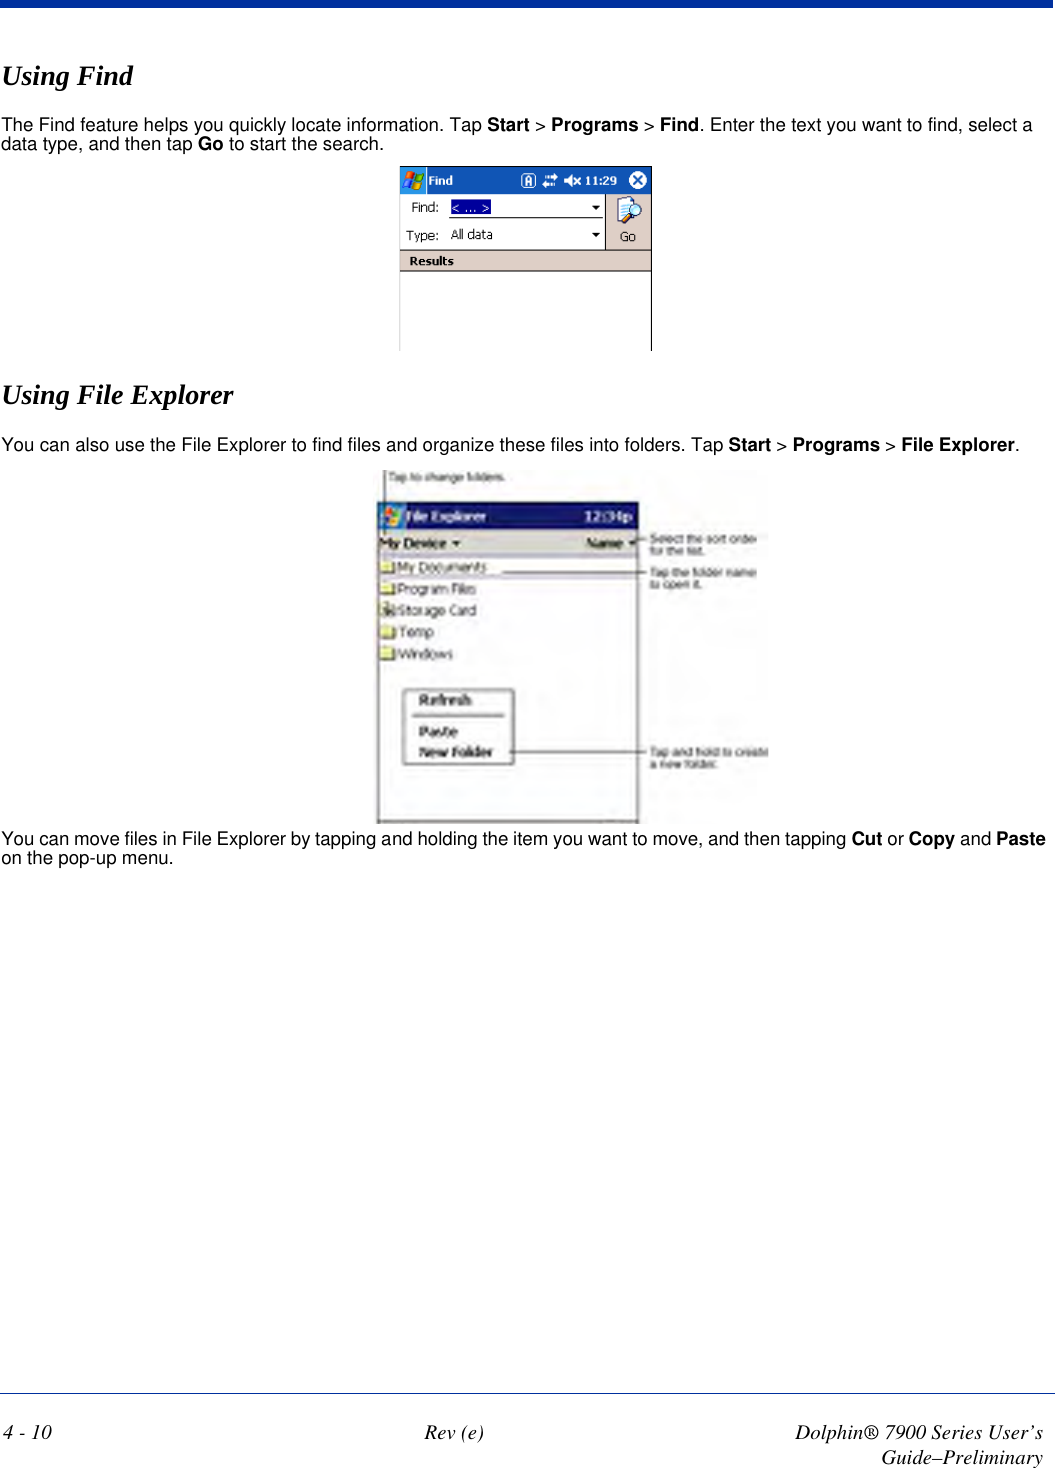 4 - 10 Rev (e) Dolphin® 7900 Series User’s Guide–PreliminaryUsing FindThe Find feature helps you quickly locate information. Tap Start &gt; Programs &gt; Find. Enter the text you want to find, select a data type, and then tap Go to start the search. Using File ExplorerYou can also use the File Explorer to find files and organize these files into folders. Tap Start &gt; Programs &gt; File Explorer.You can move files in File Explorer by tapping and holding the item you want to move, and then tapping Cut or Copy and Paste on the pop-up menu.